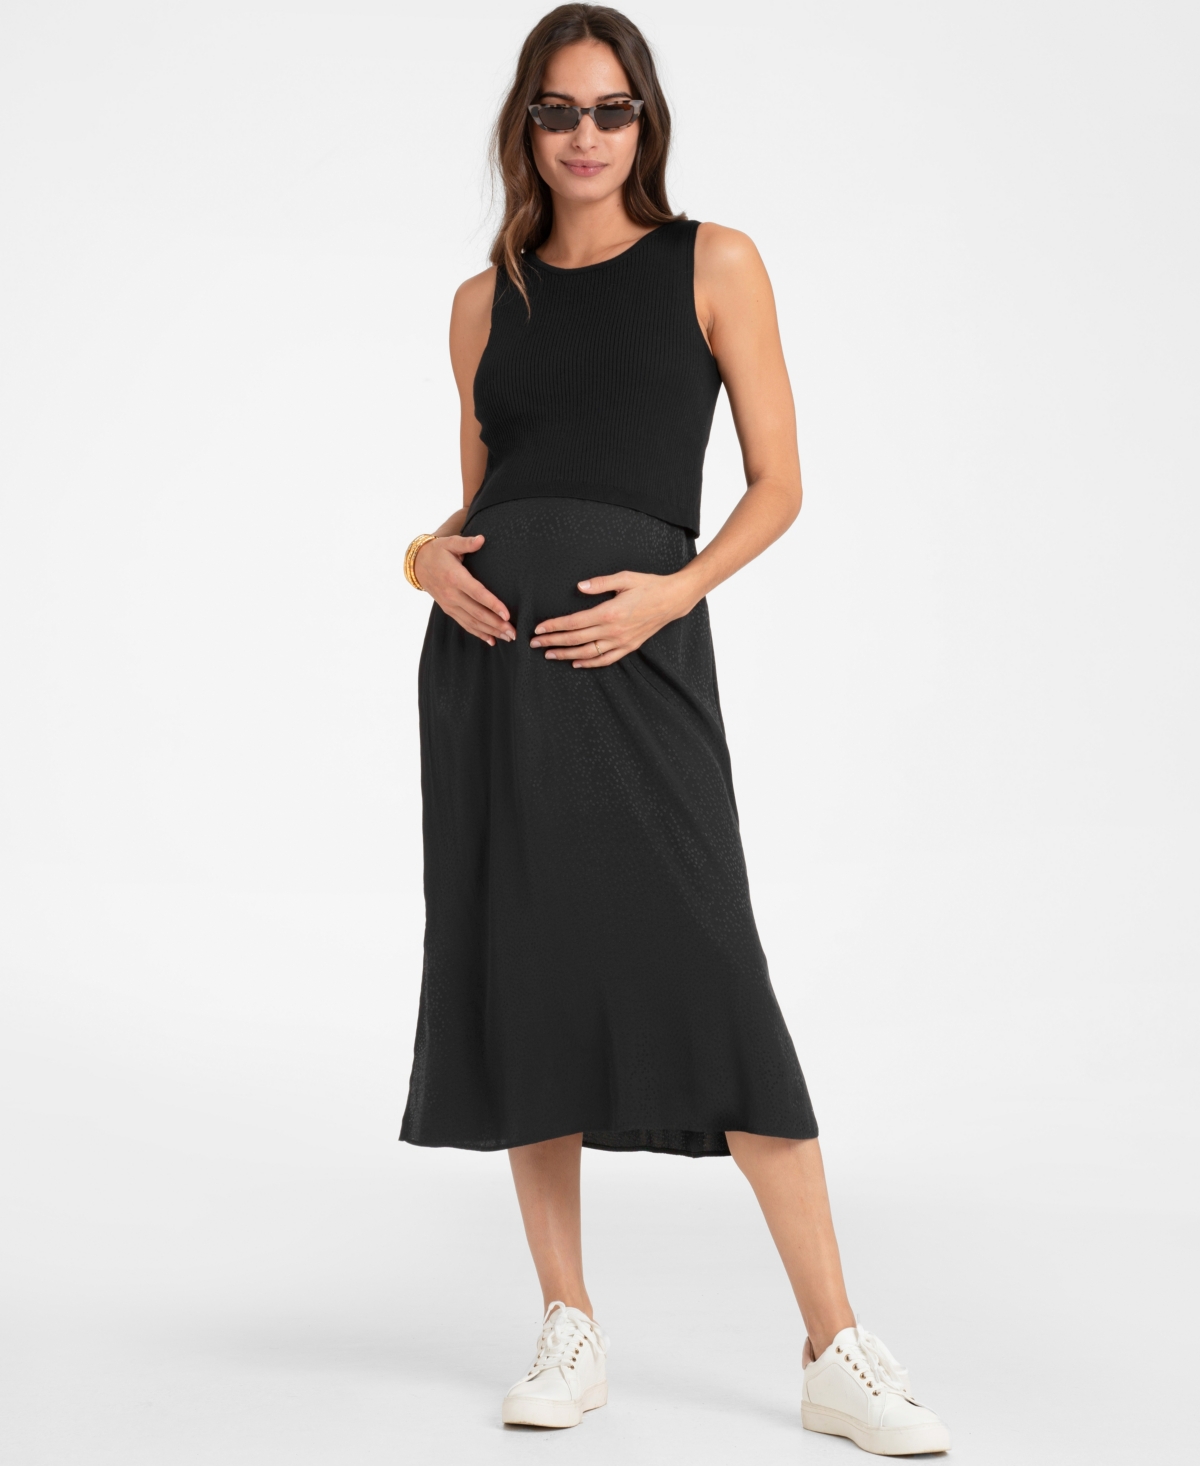 Seraphine Women's 2-in-1 Maternity And Nursing Knit Top Dress In Black